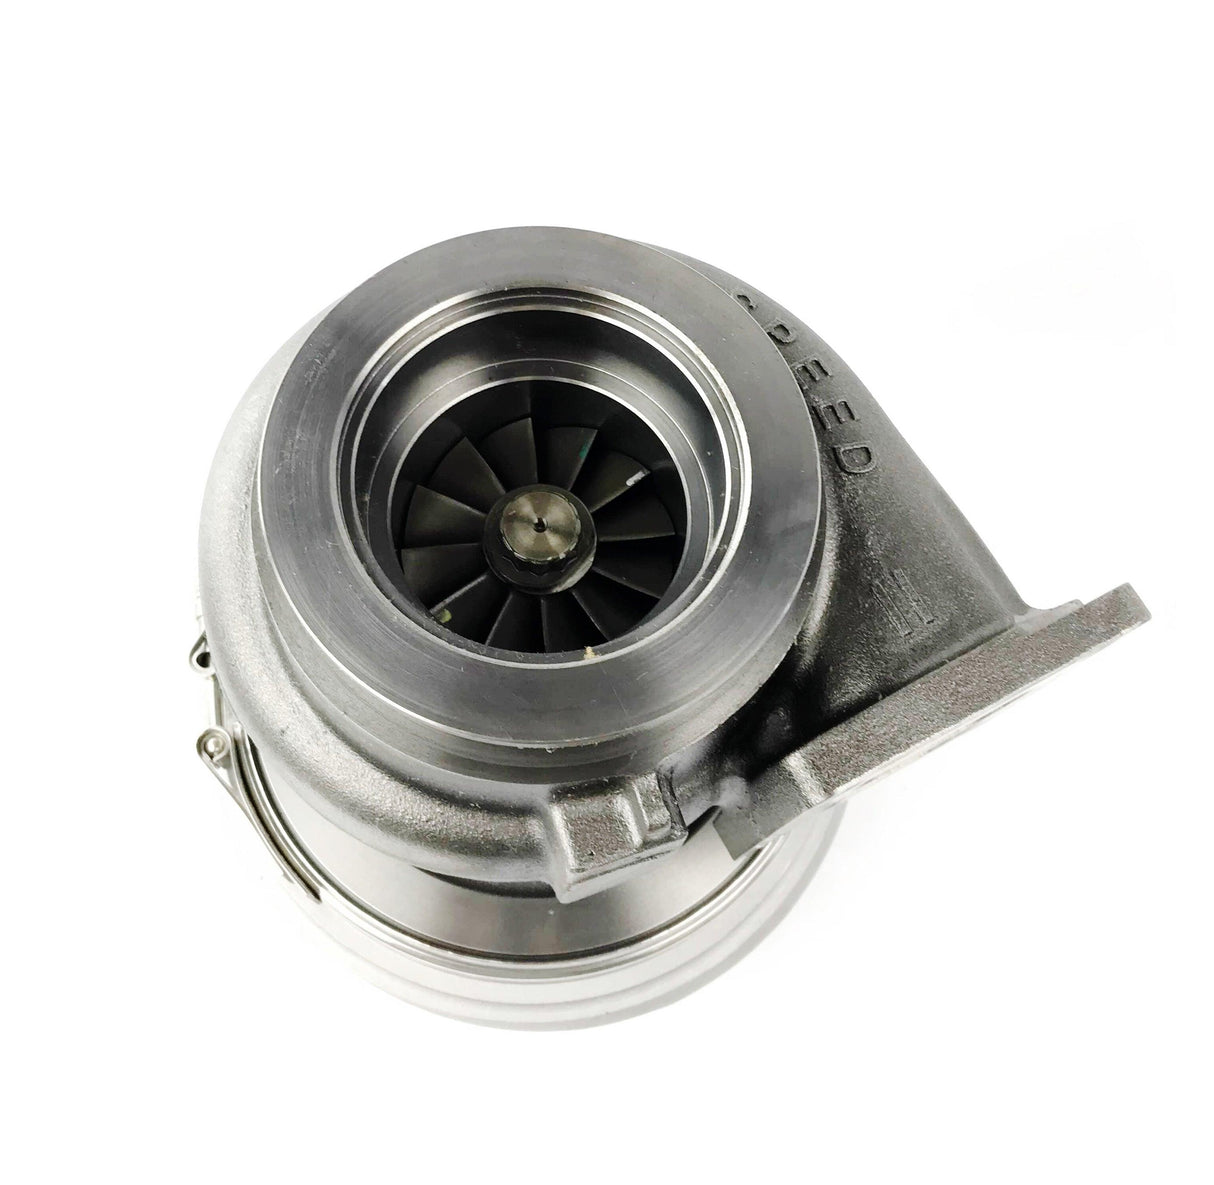 S-22605 20516147 Newstar® Turbocharger For Volvo D12 D12C No Core Charge.